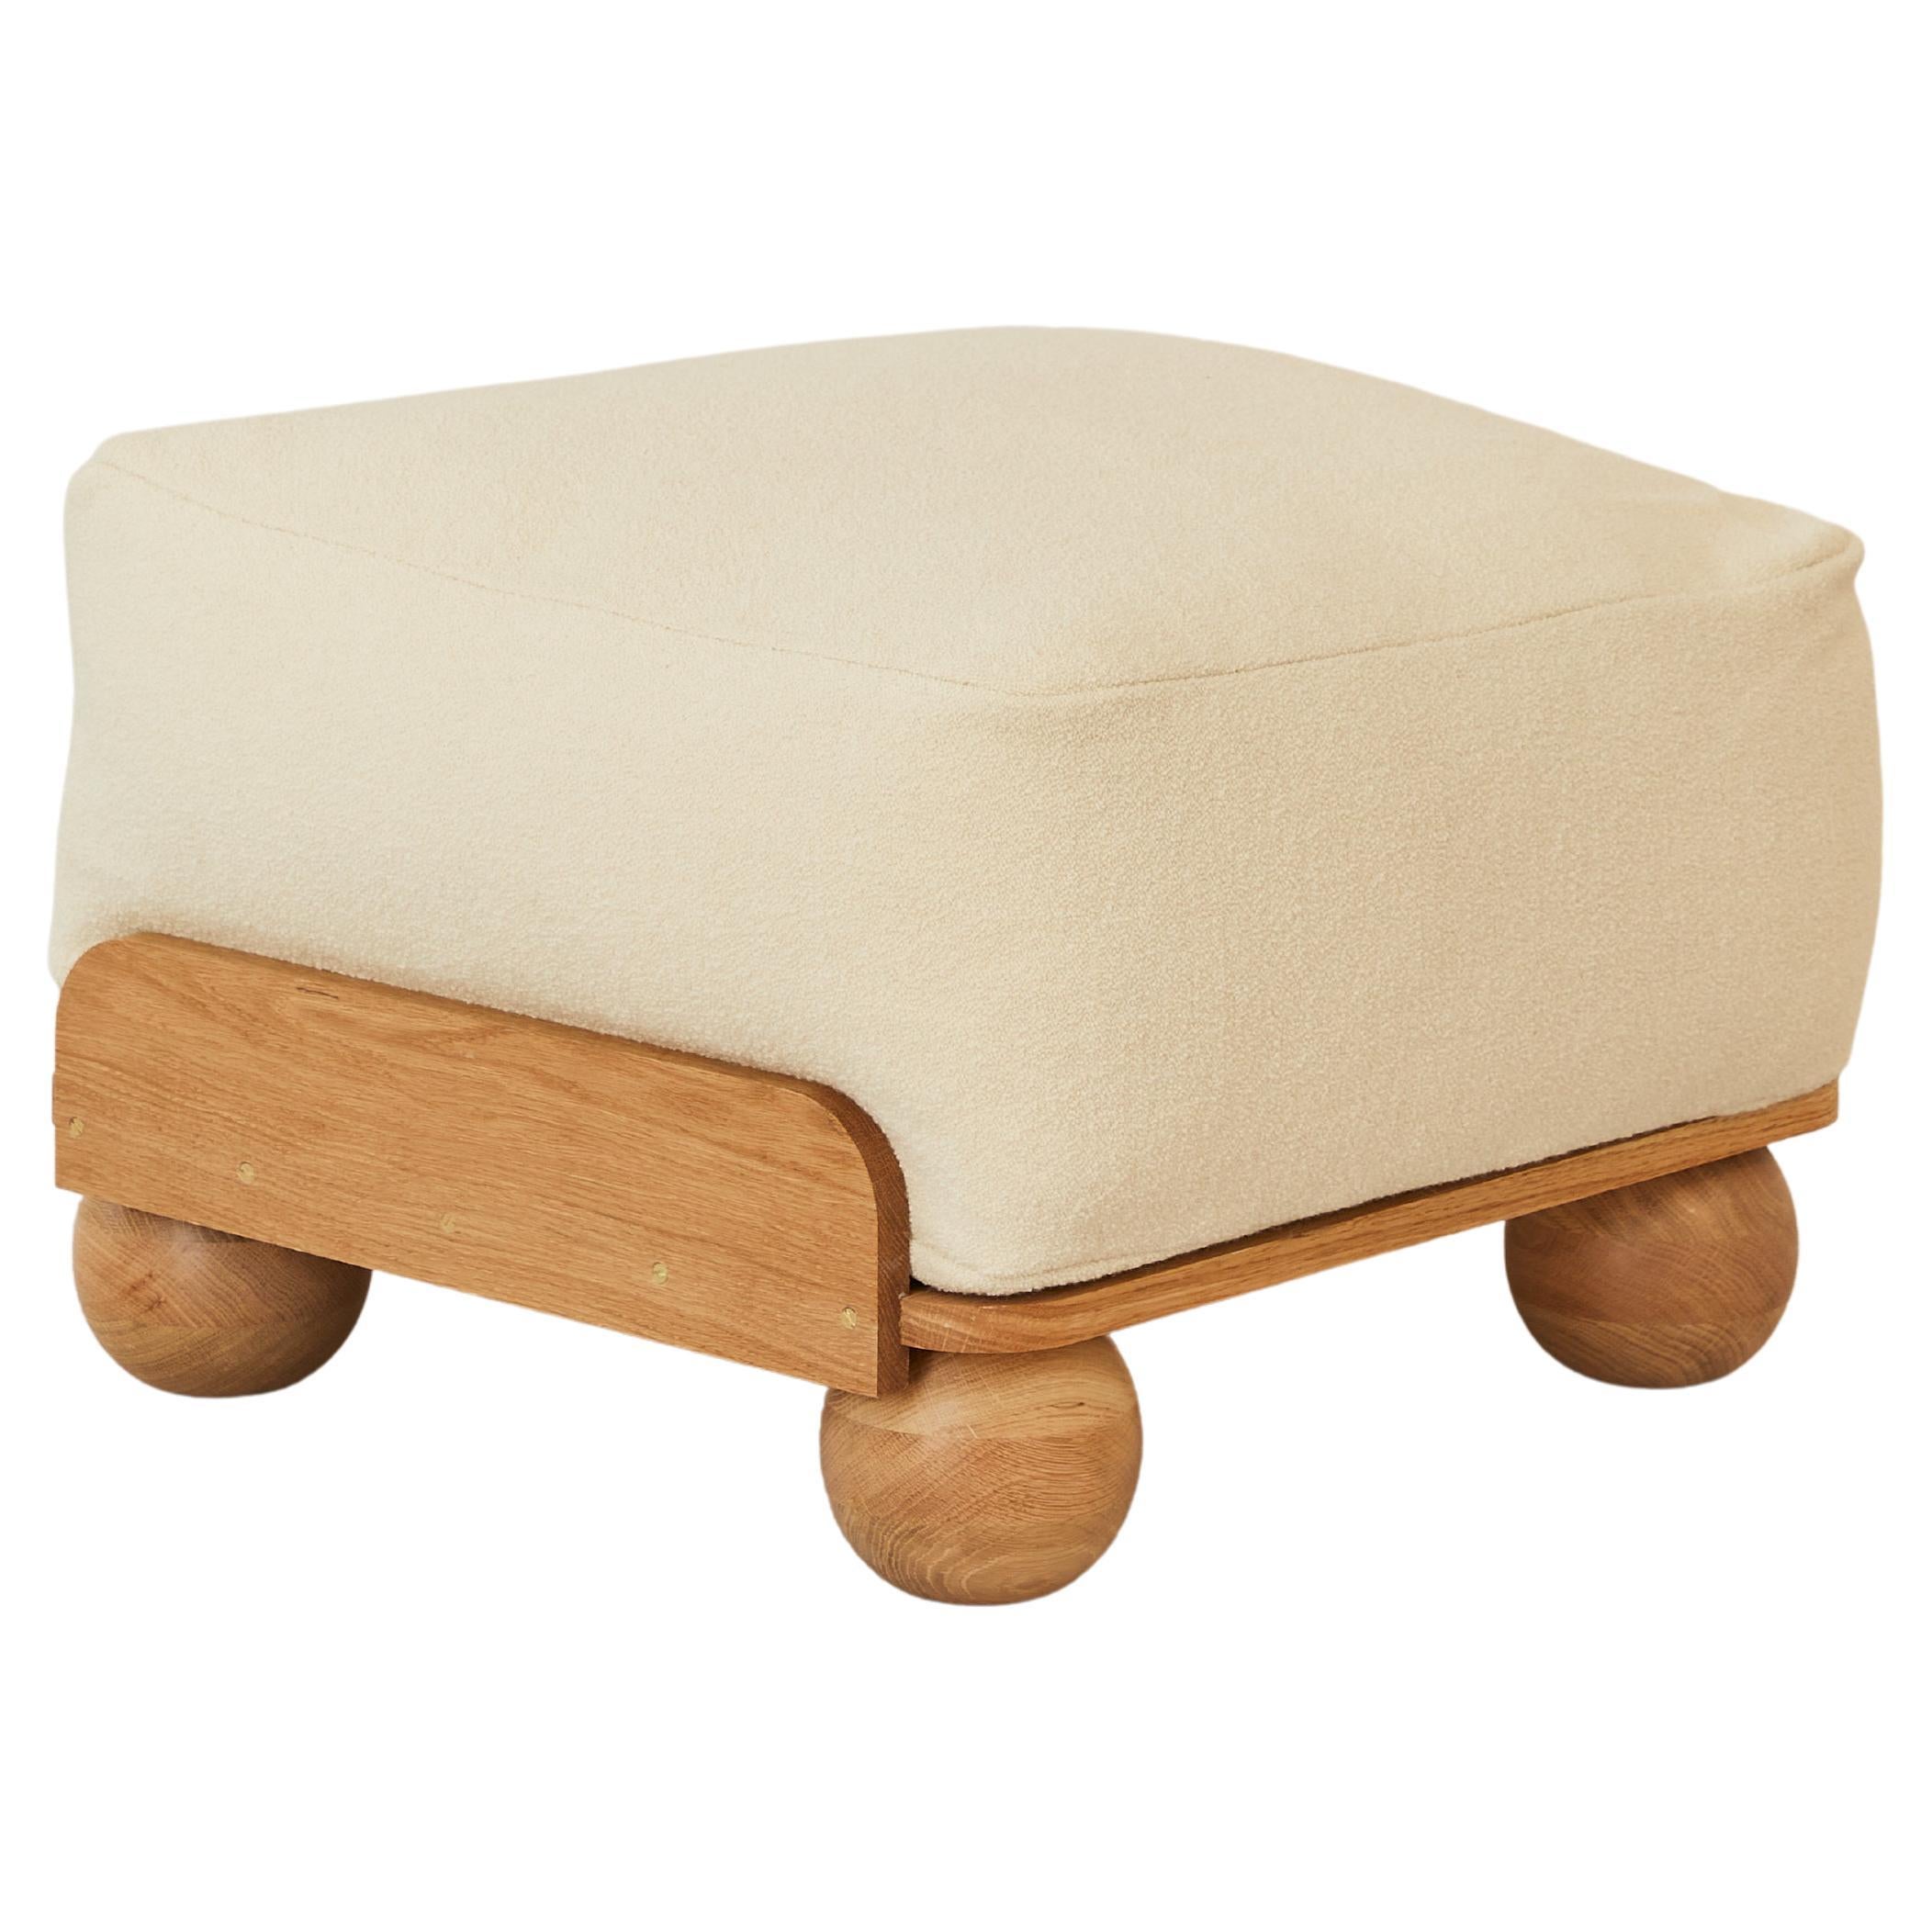 Cove Footstool in Chalk White